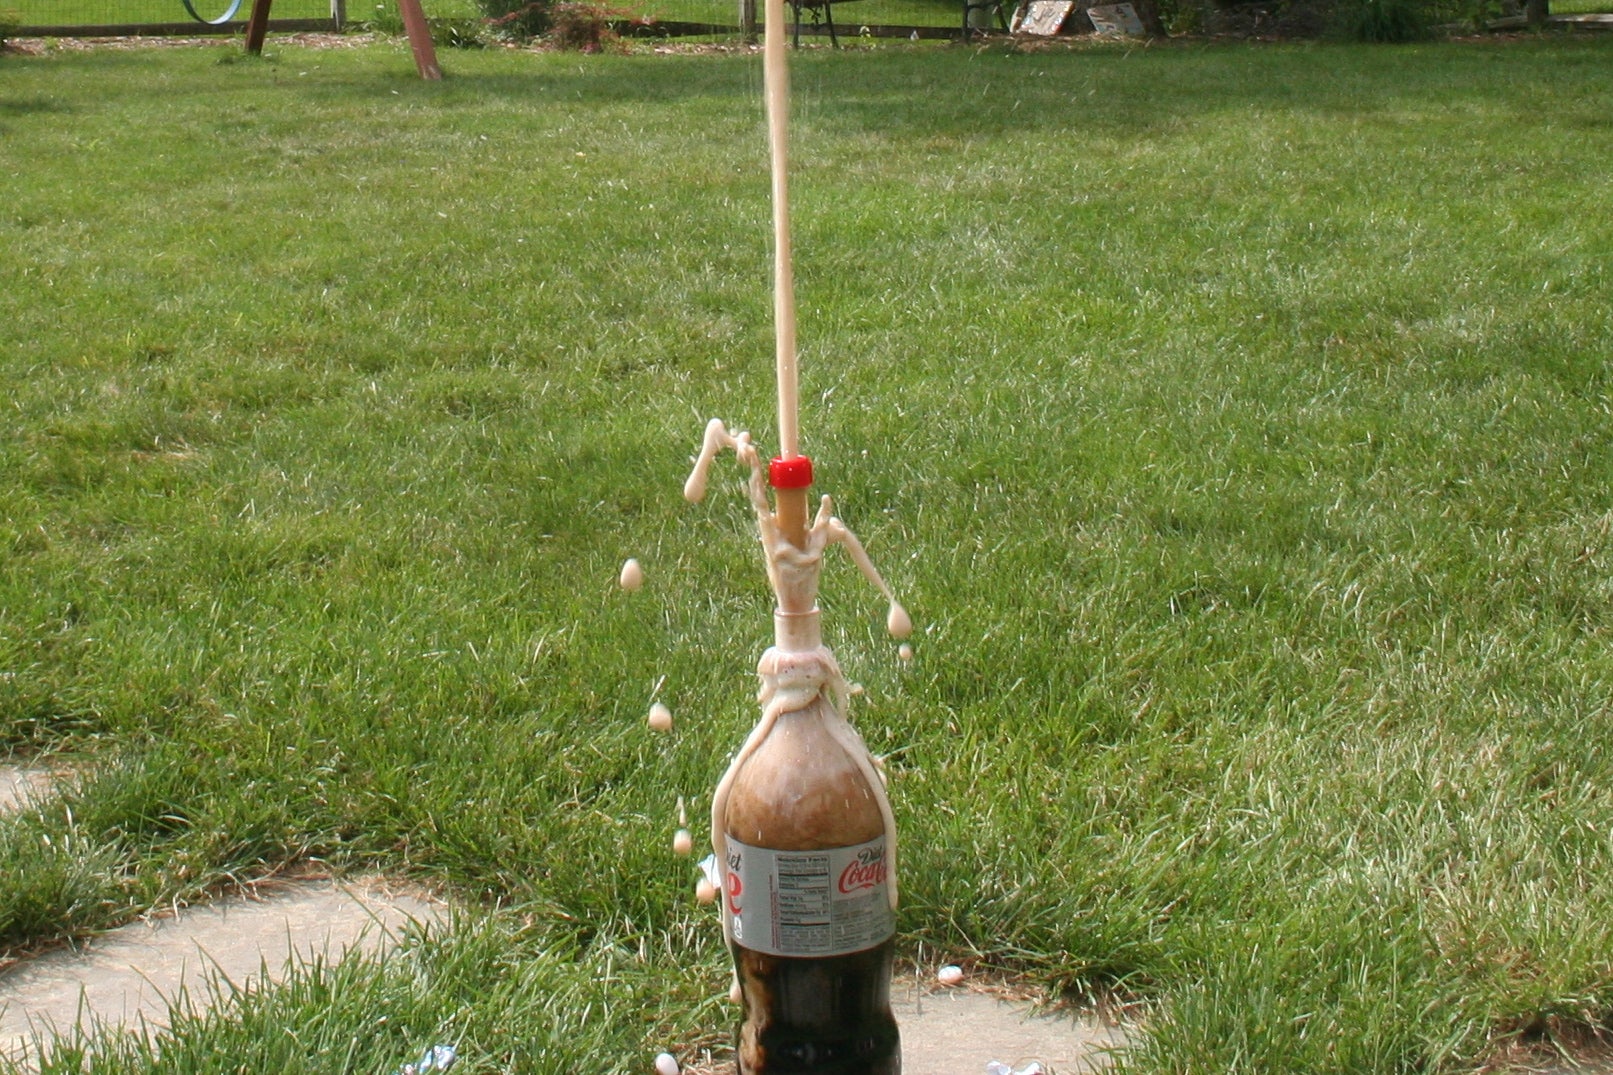 Mentos and Coke With "Geyser Tube"